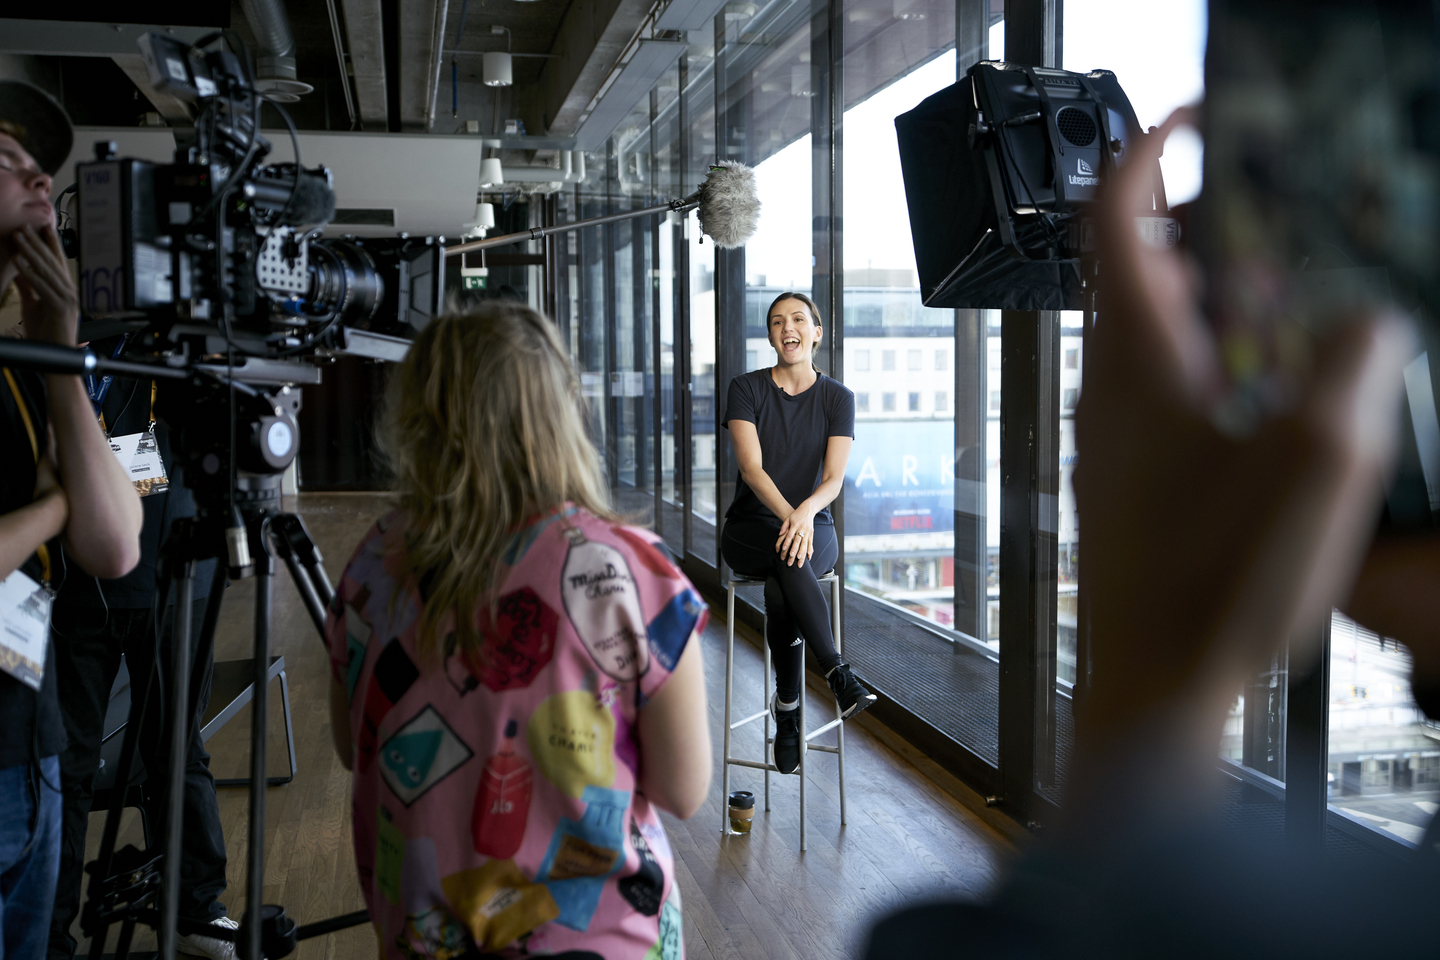 An interview with Adriene Mishler. Photo by Richard Pflaume/Daimler AG